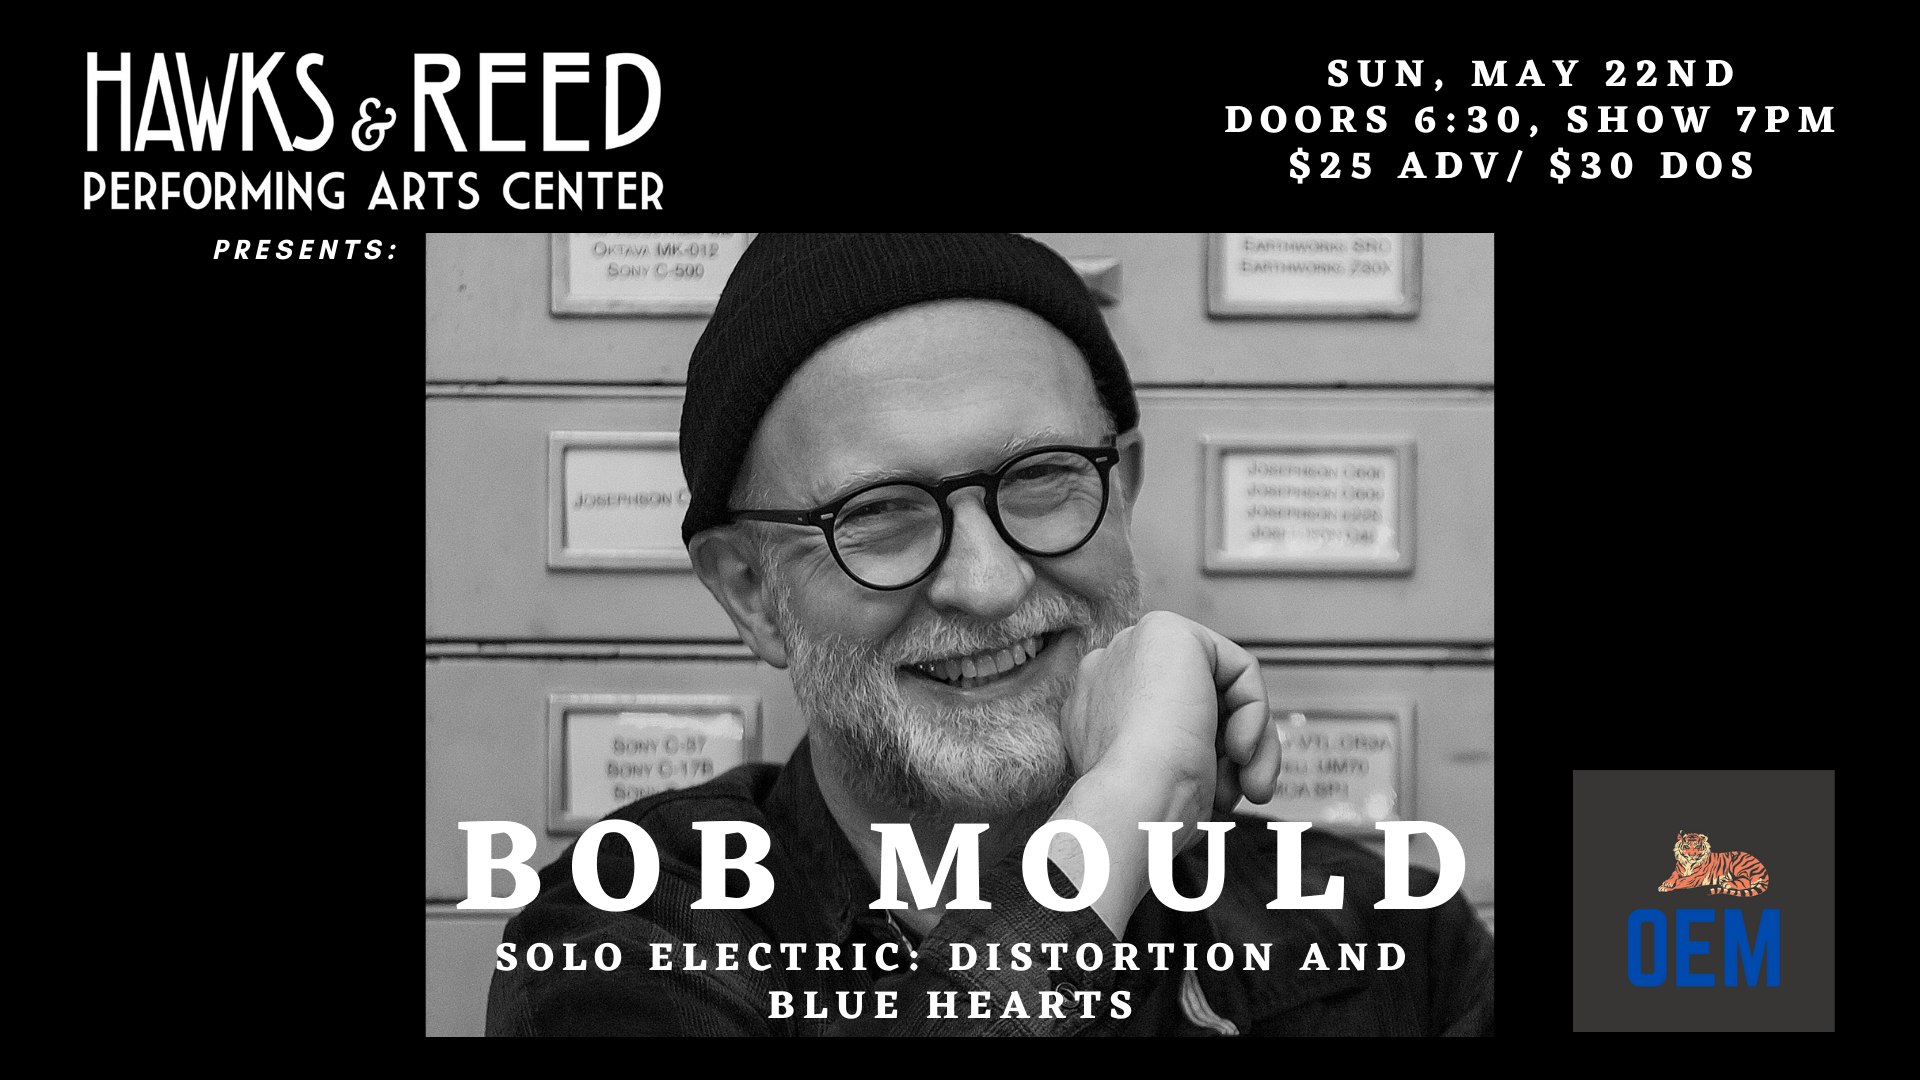 Bob Mould Solo Electric: Distortion and Blue Hearts at Hawks and Reed!